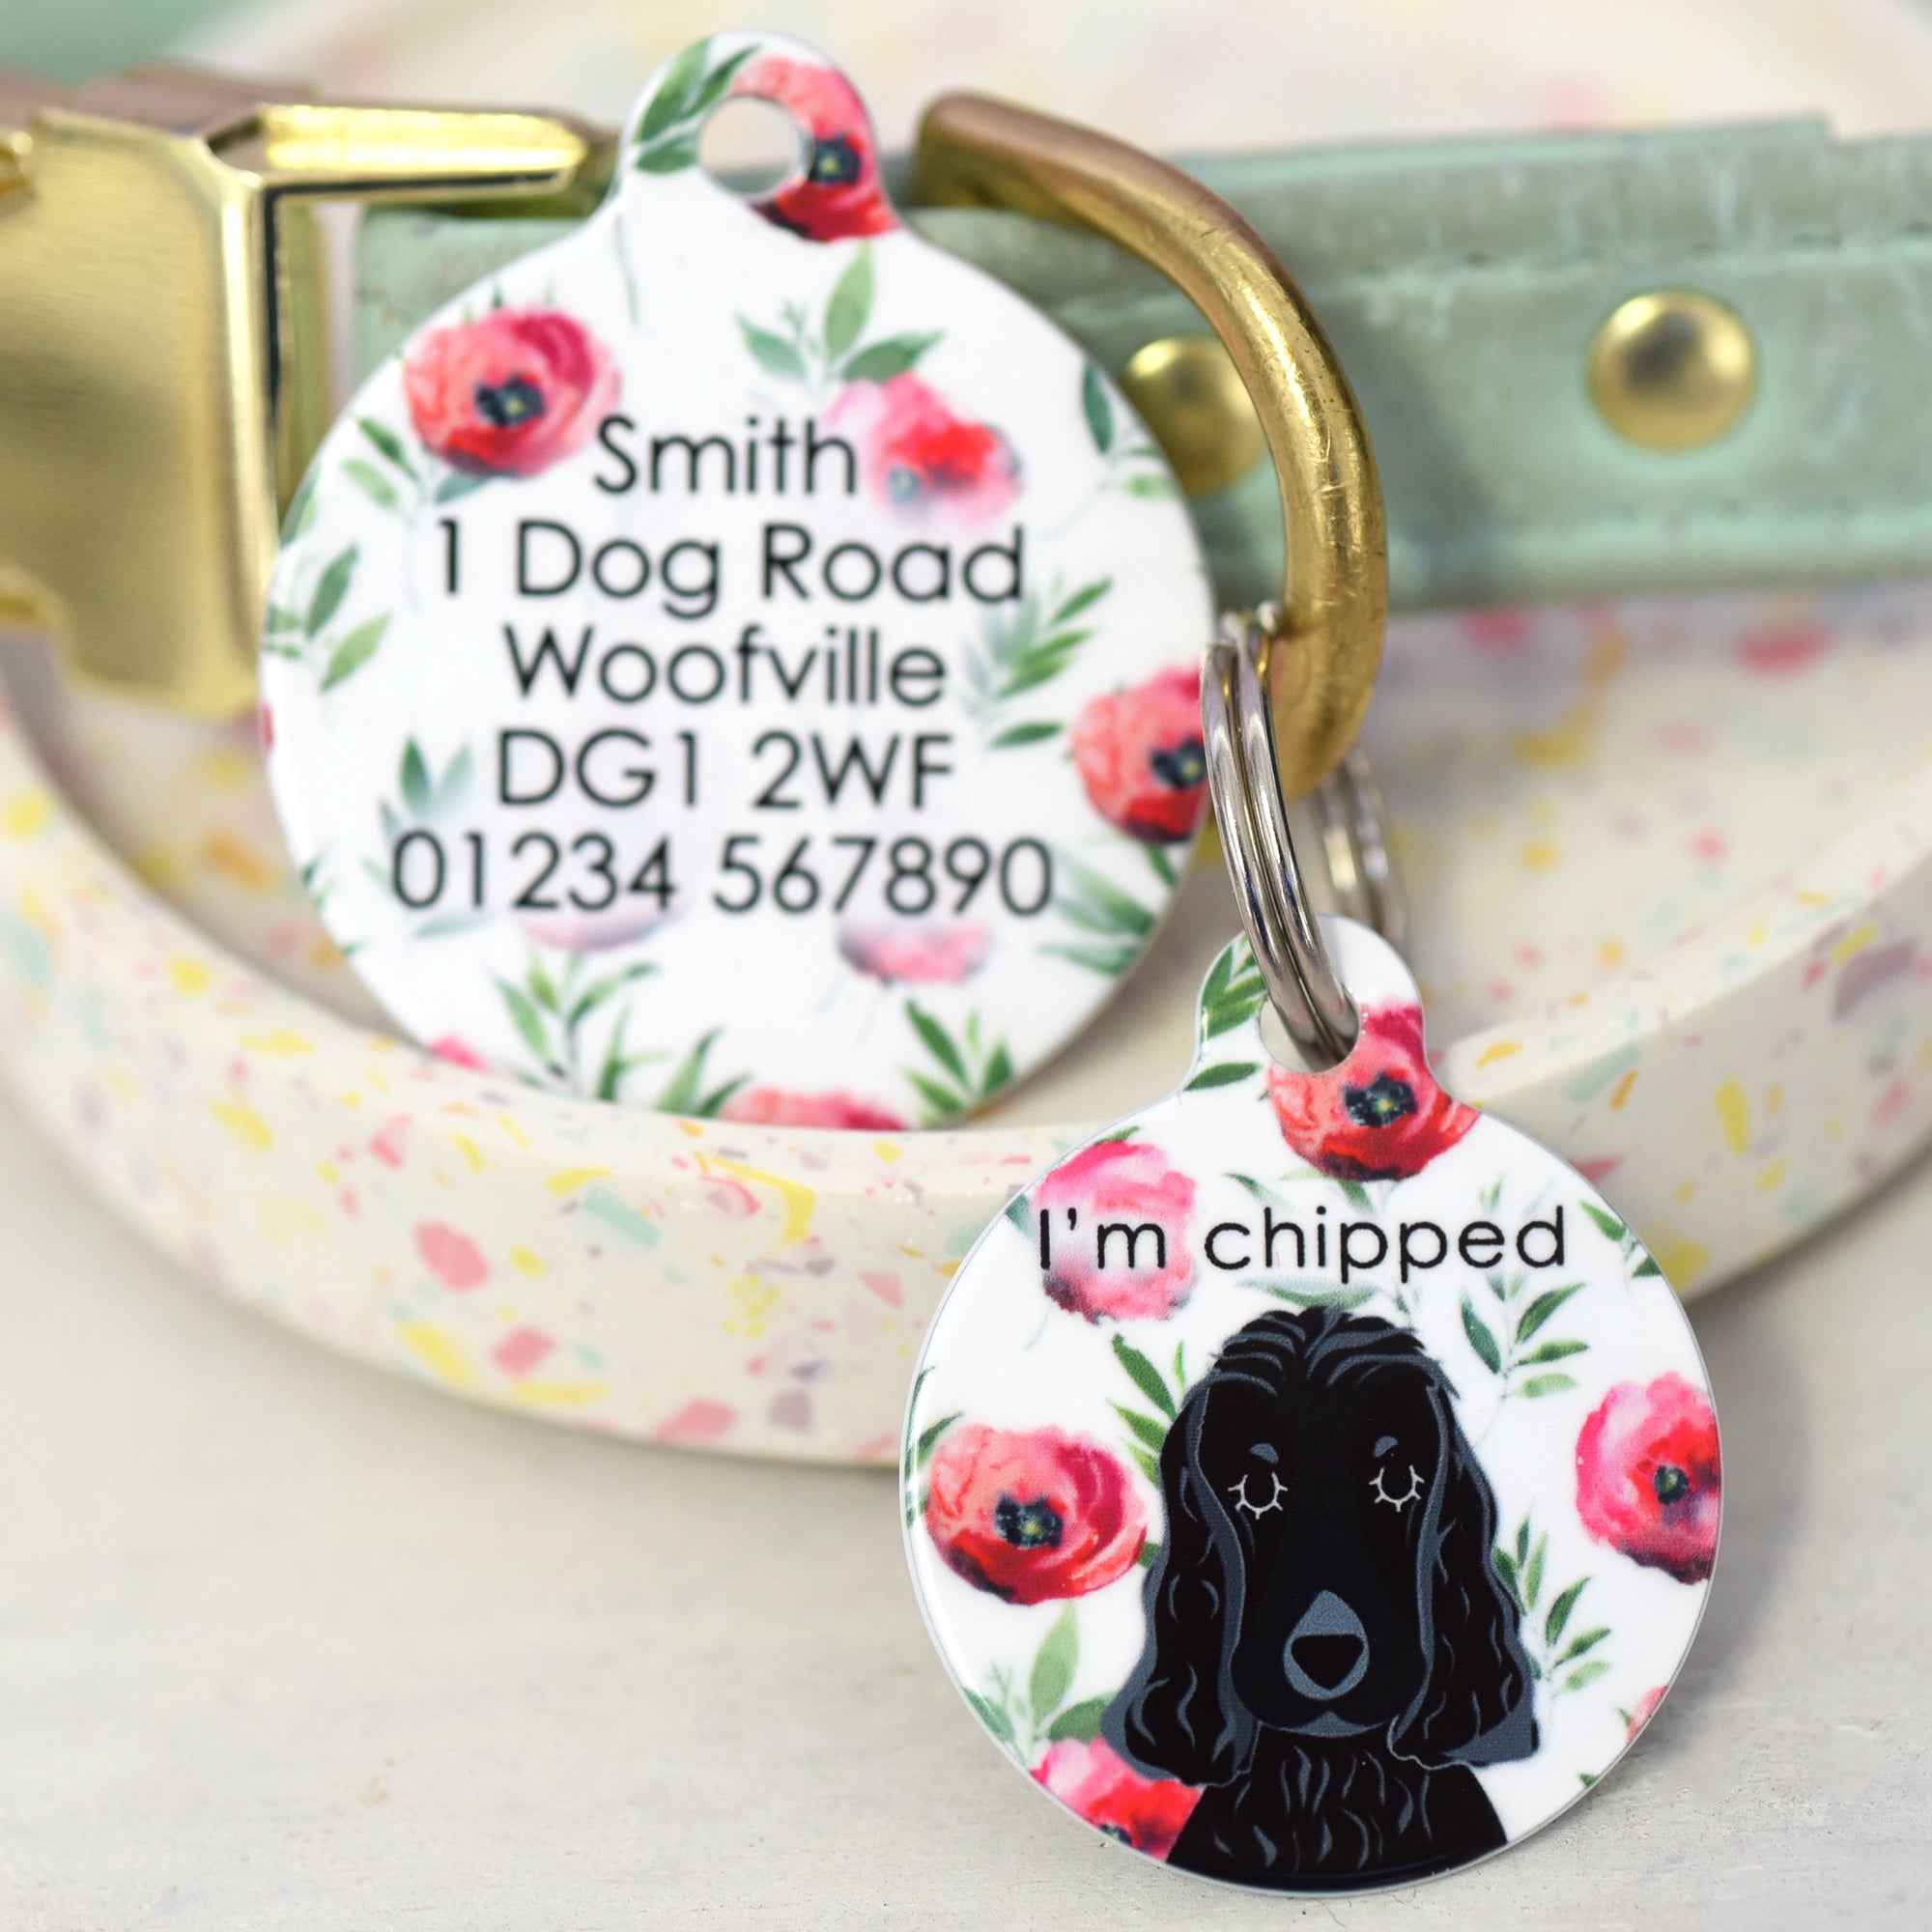 Personalised Dog Tag - Red Flowers